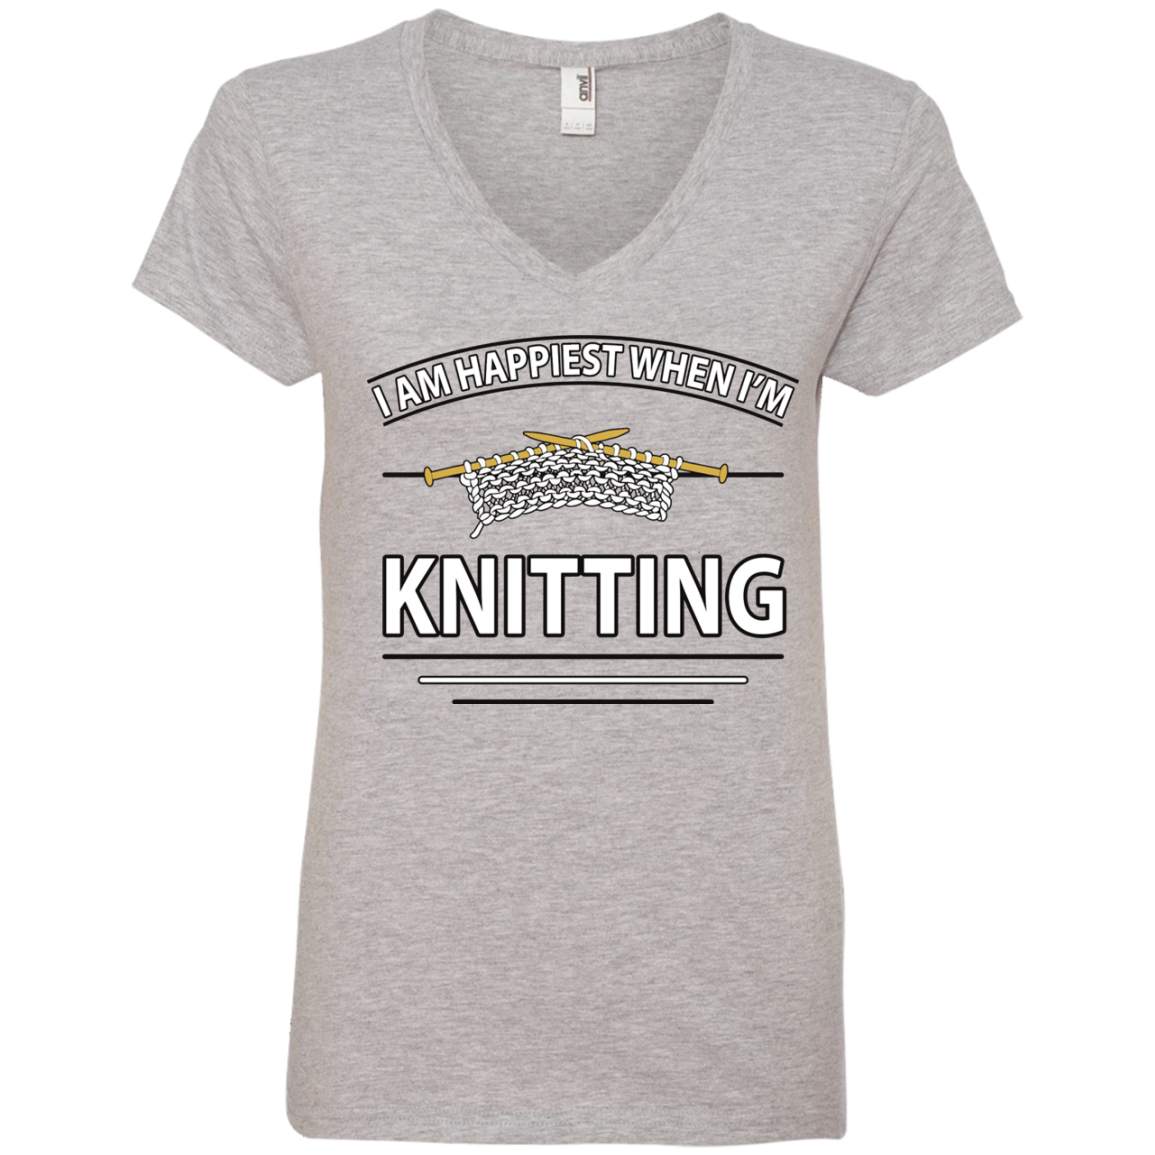 I Am Happiest When I'm Knitting Ladies V-neck Tee - Crafter4Life - 2